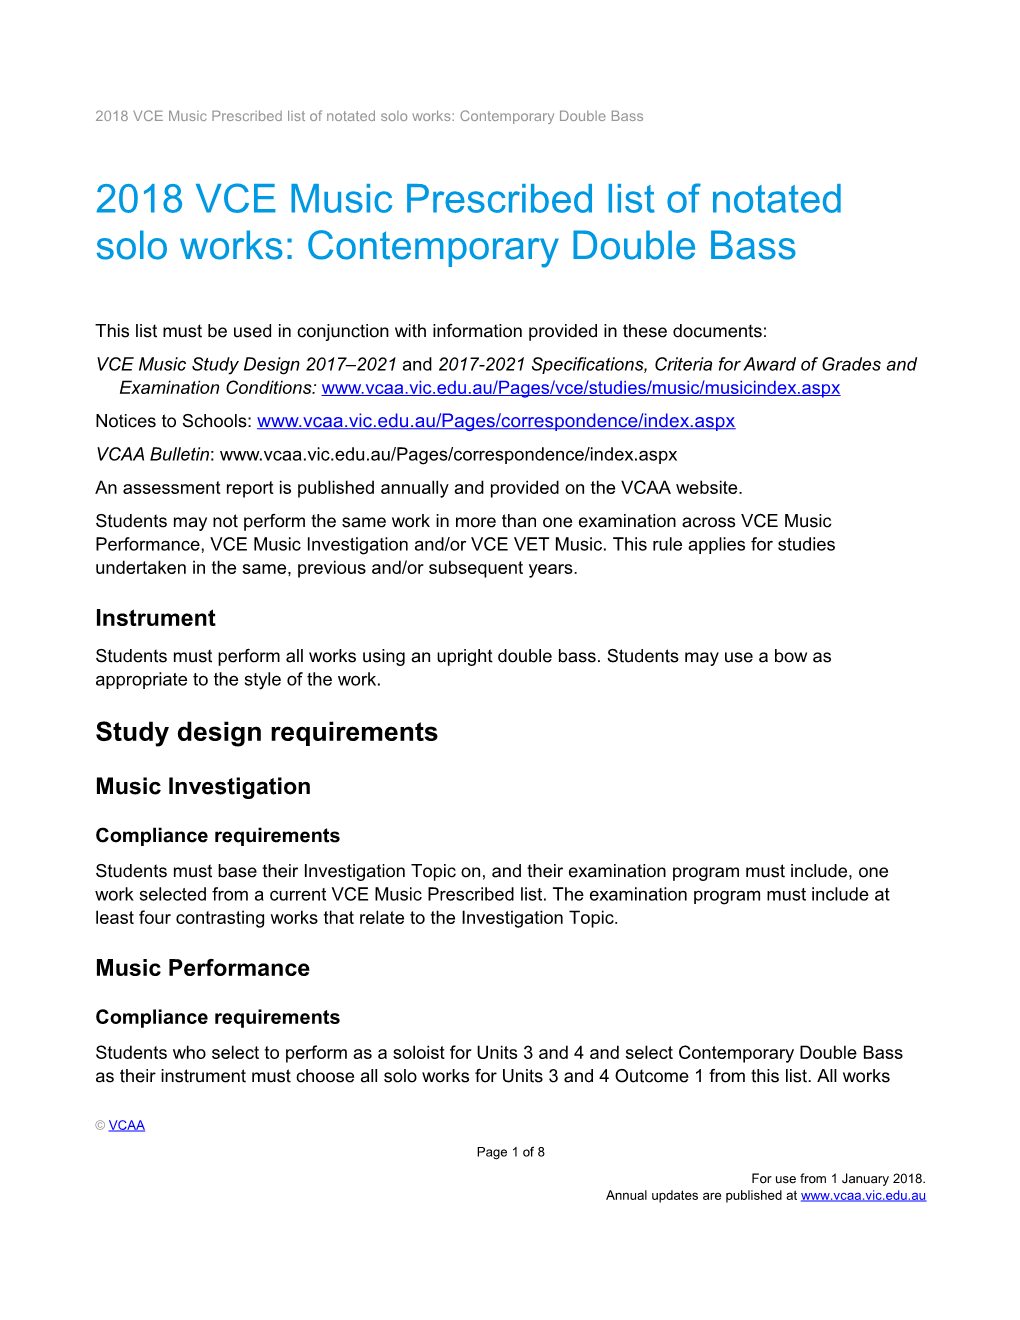 2018 VCE Music Prescribed List of Notated Solo Works: Contemporary Double Bass